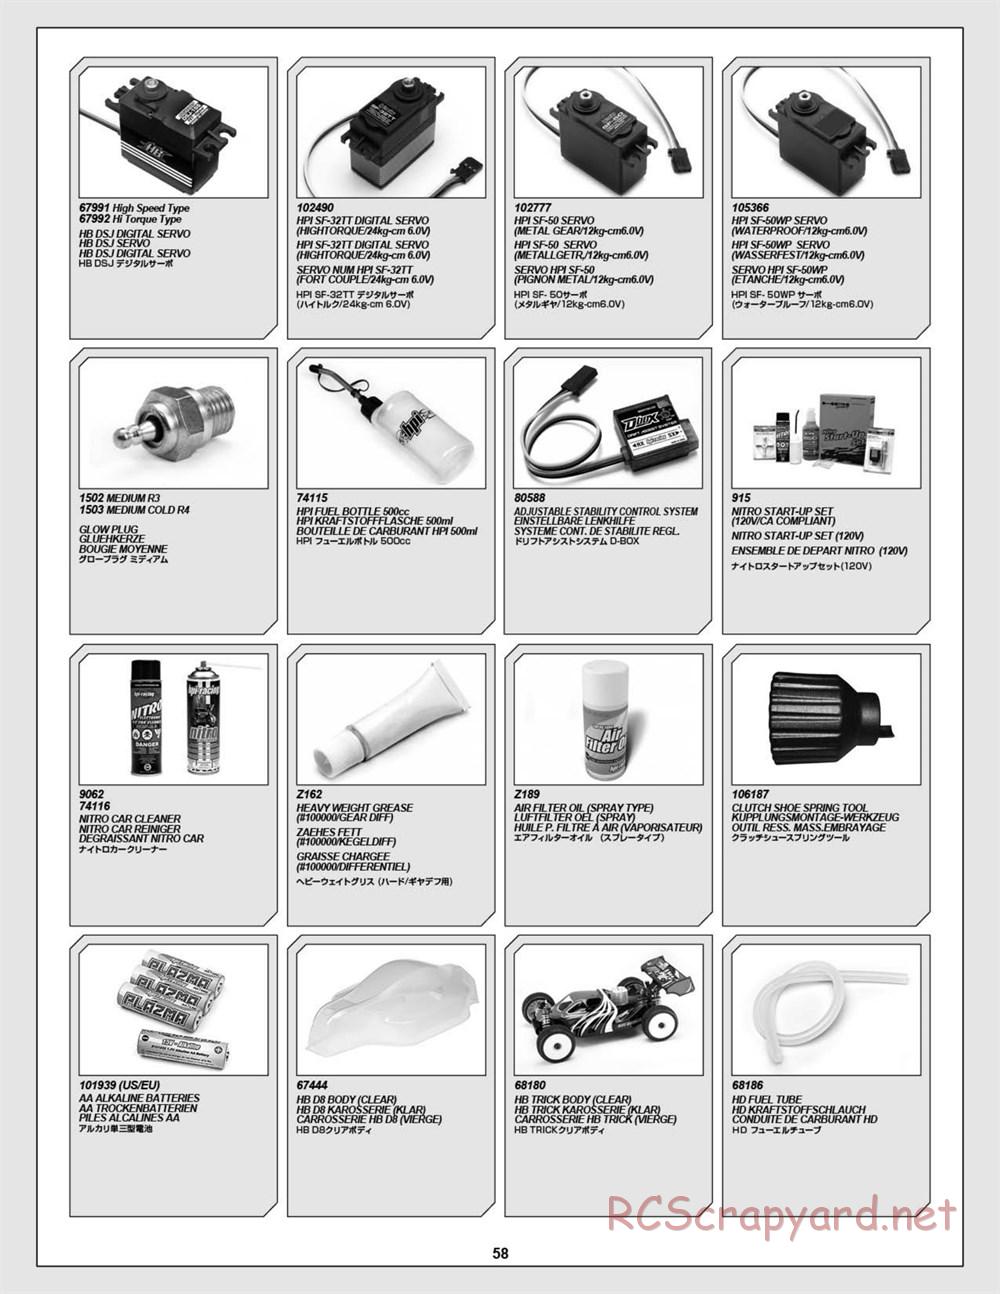 HPI - D8S - Manual - Page 58